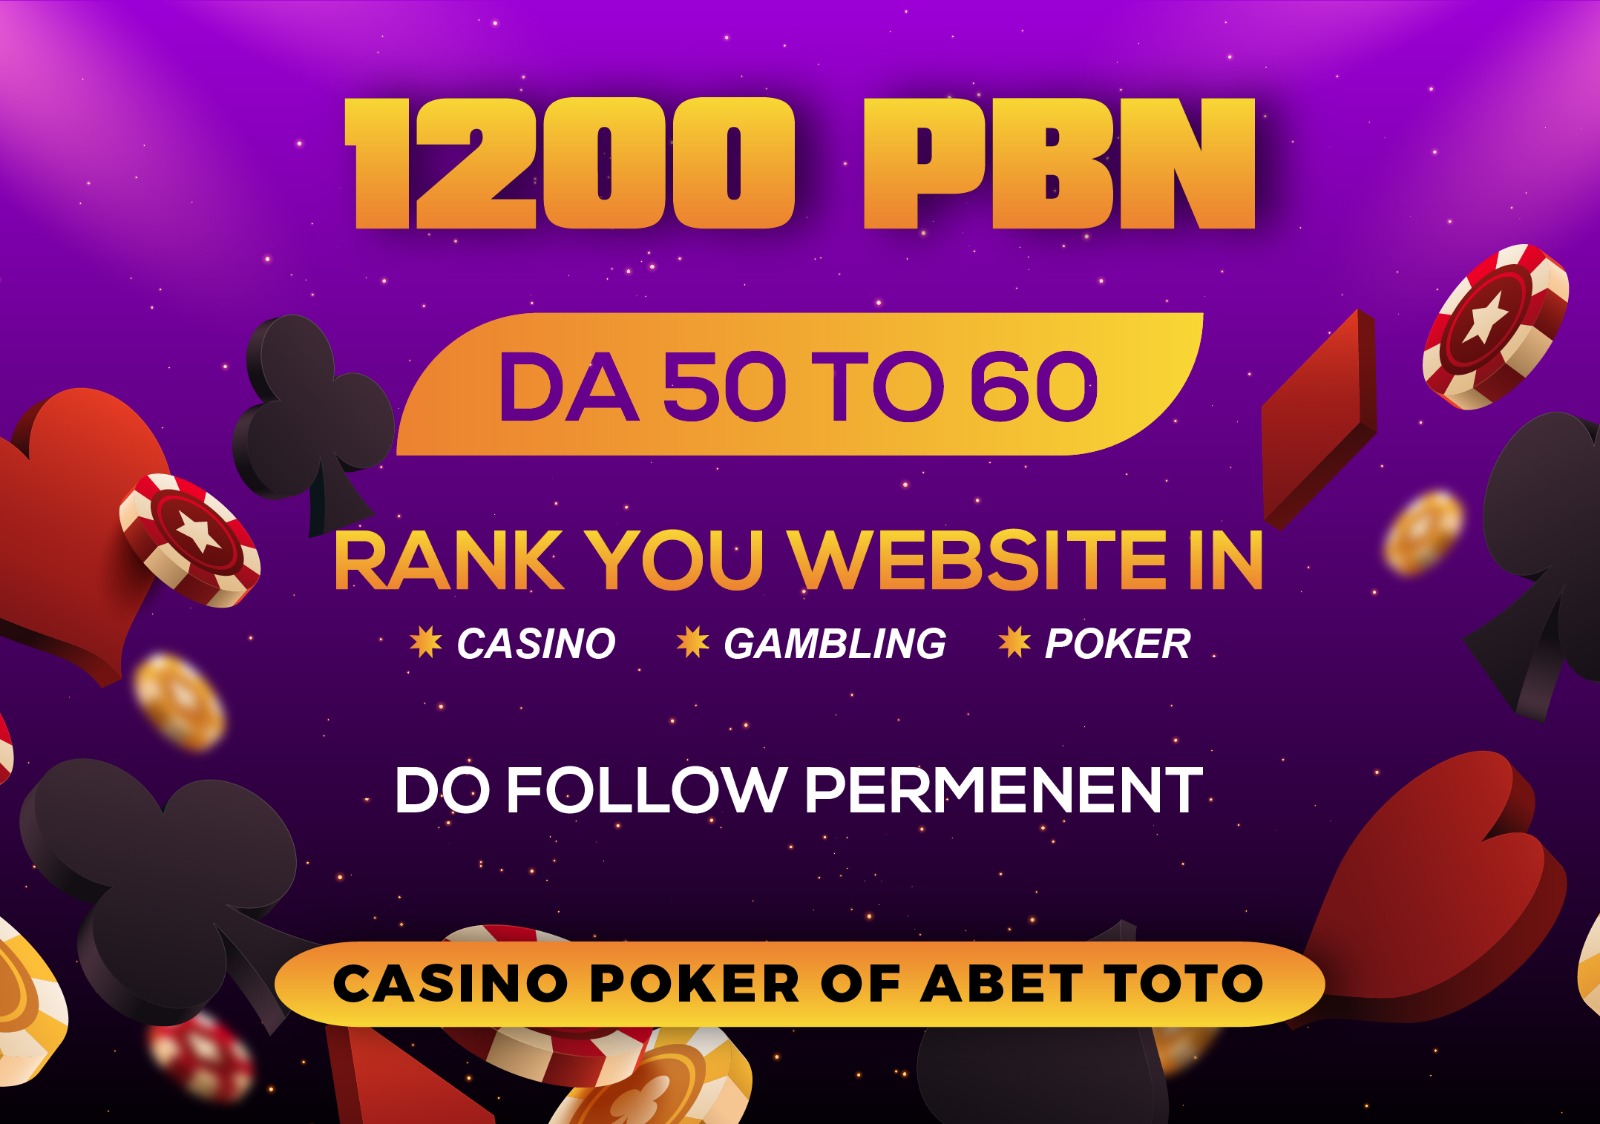 Limited Time Offer 1200 Casino Judi Bola Poker PBNs on DA50+ Permanent SEO Backlinks Boost Your Rank